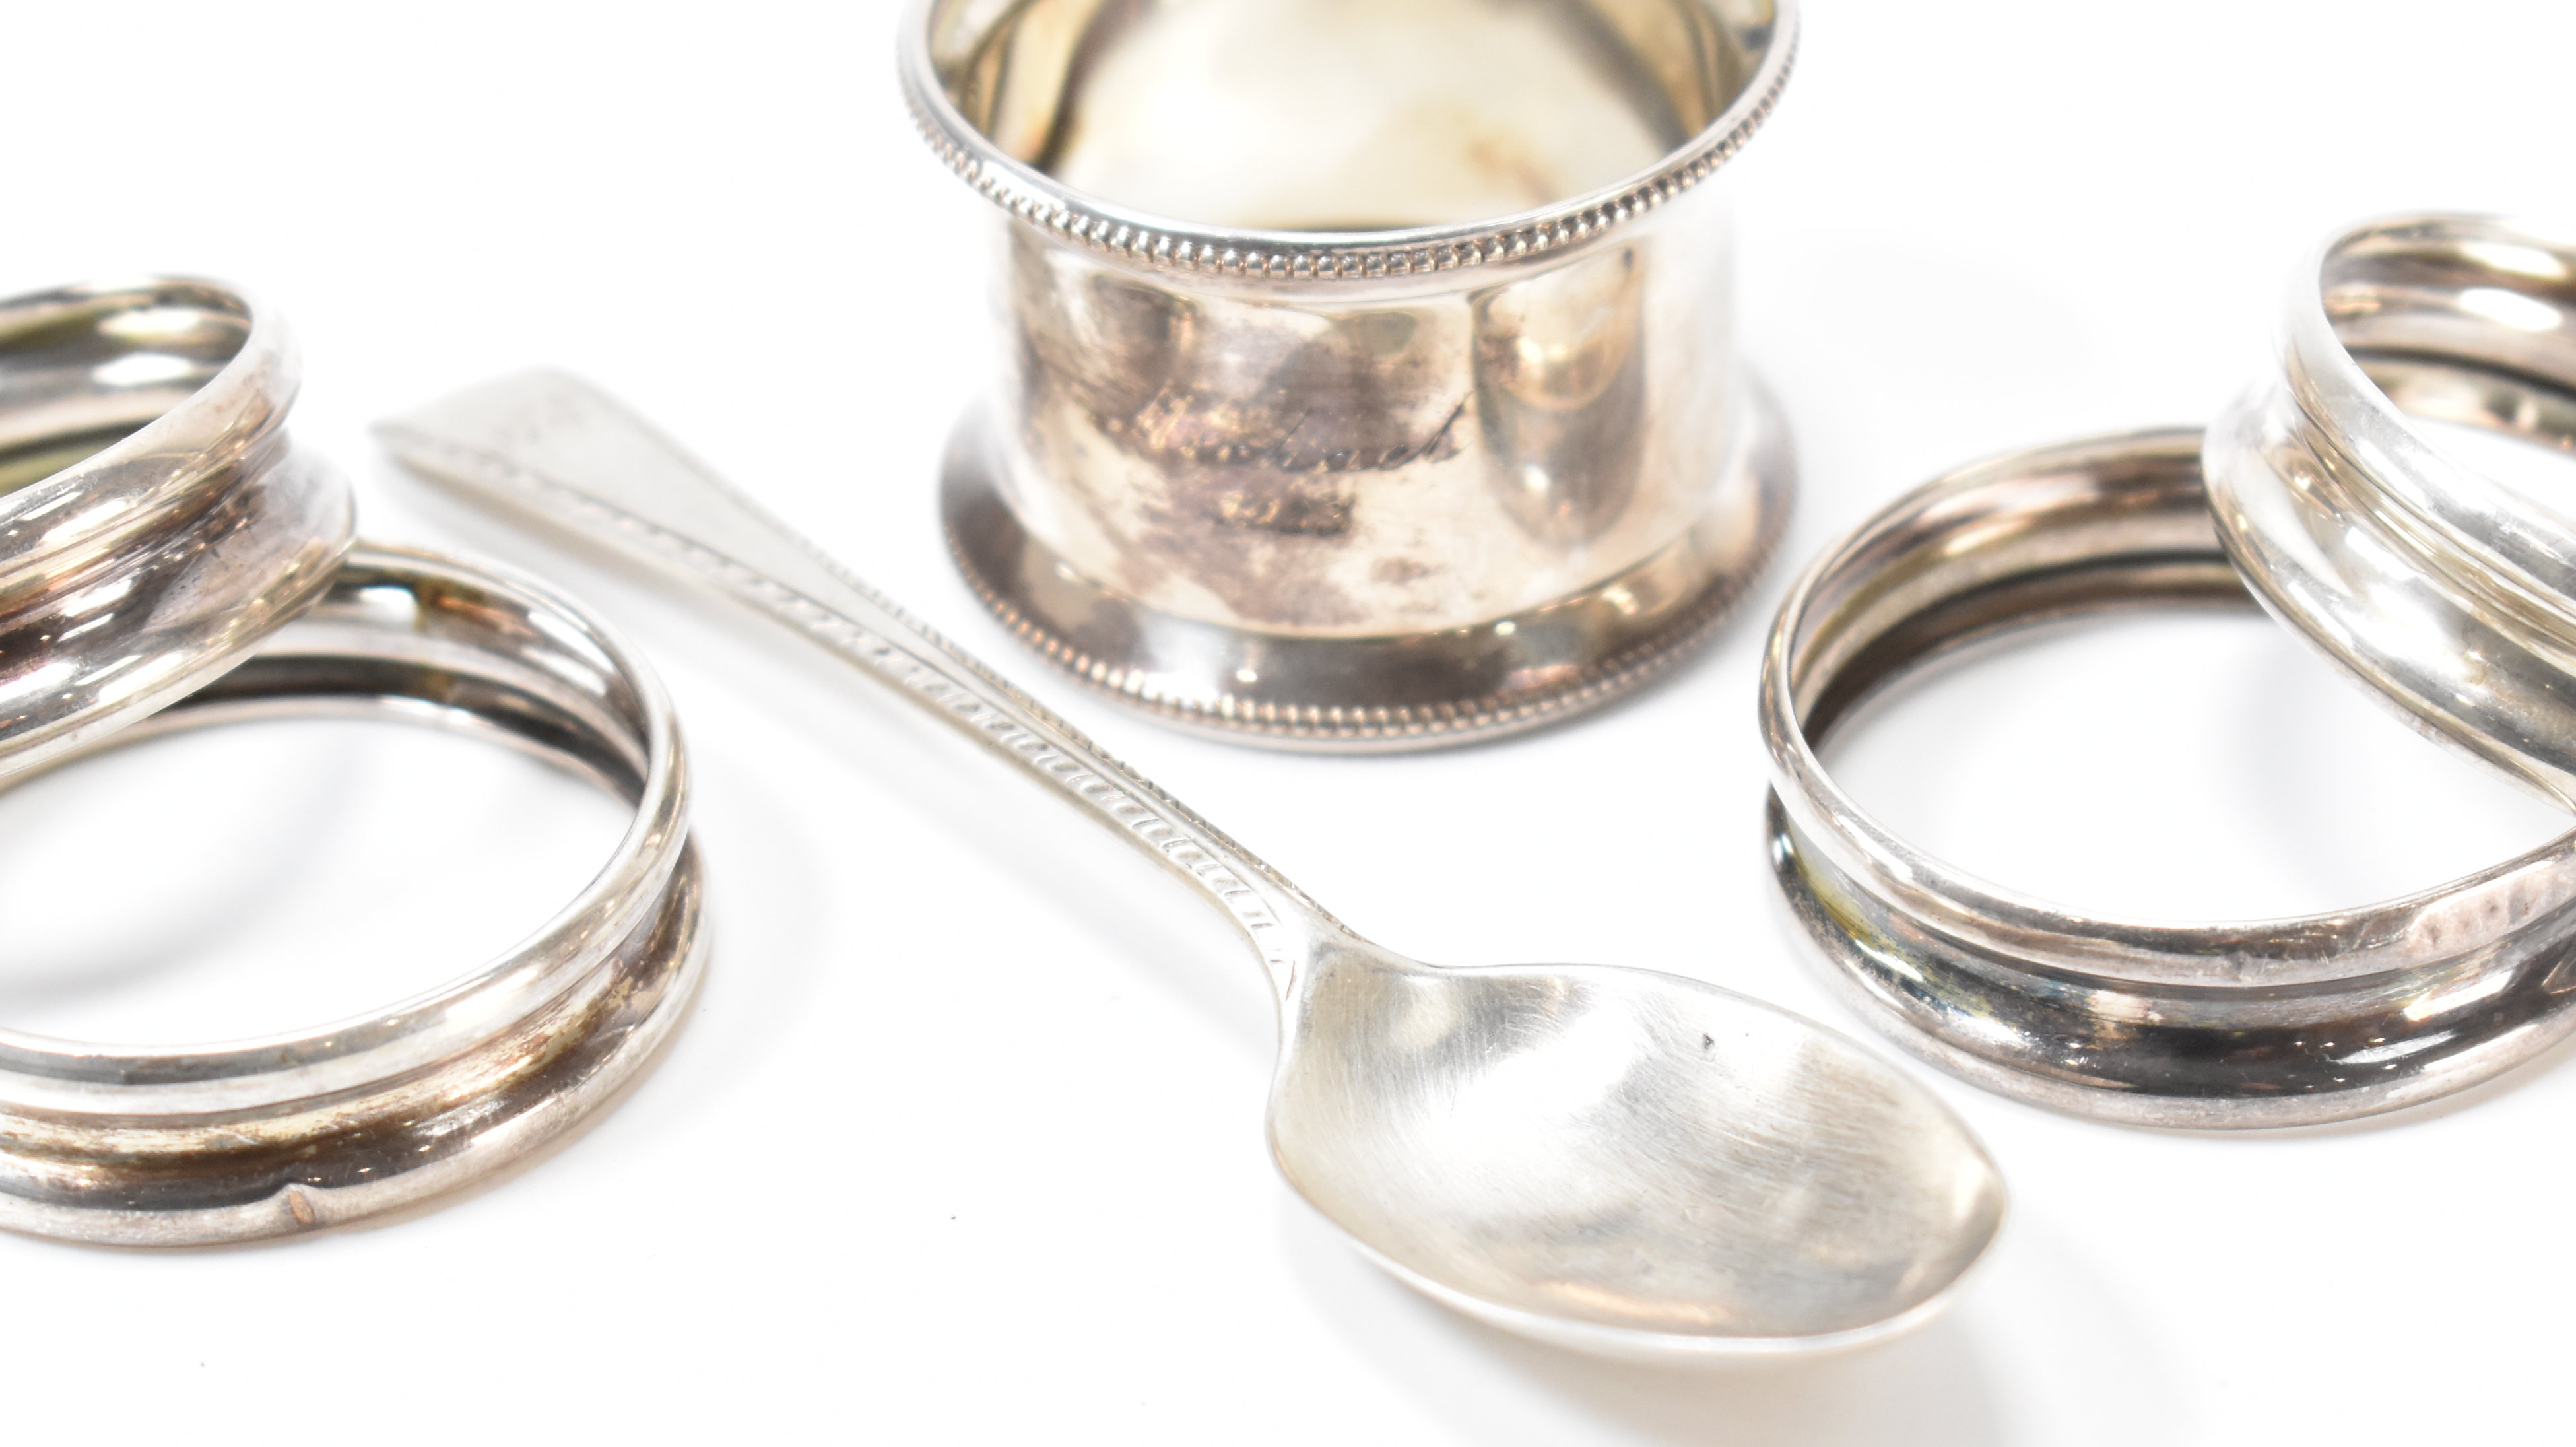 GROUP OF SILVER HALLMARKED ITEMS - NAPKIN RINGS & SPOON - Image 3 of 5